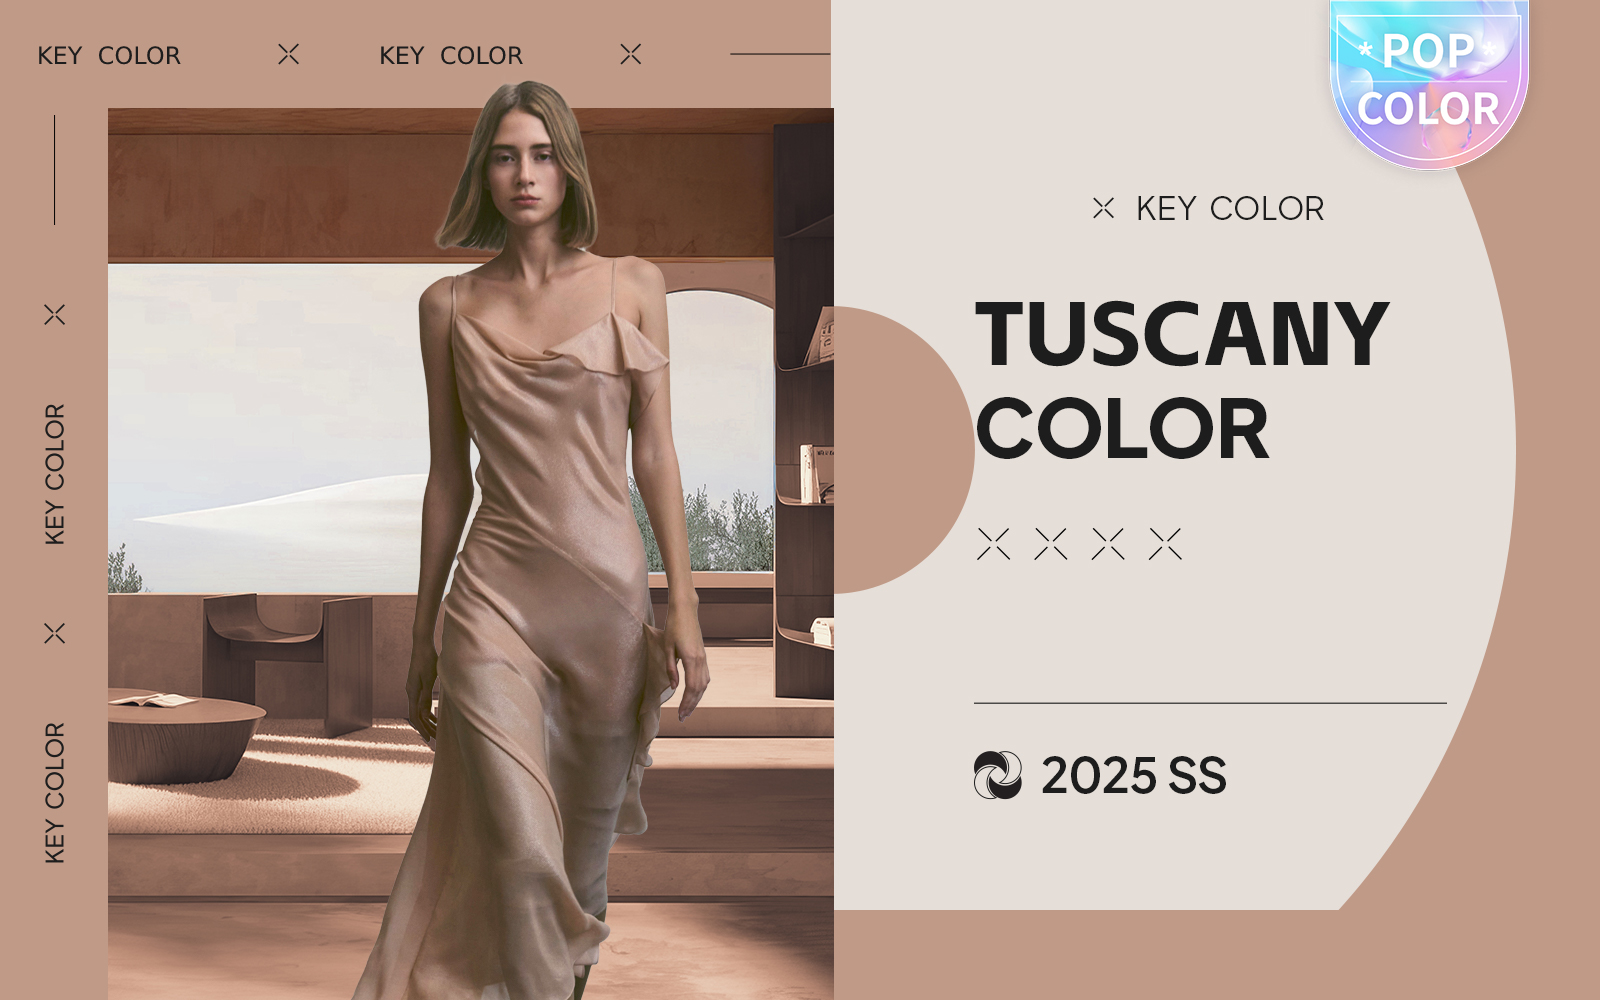 Tuscany -- The Color Trend for Womenswear